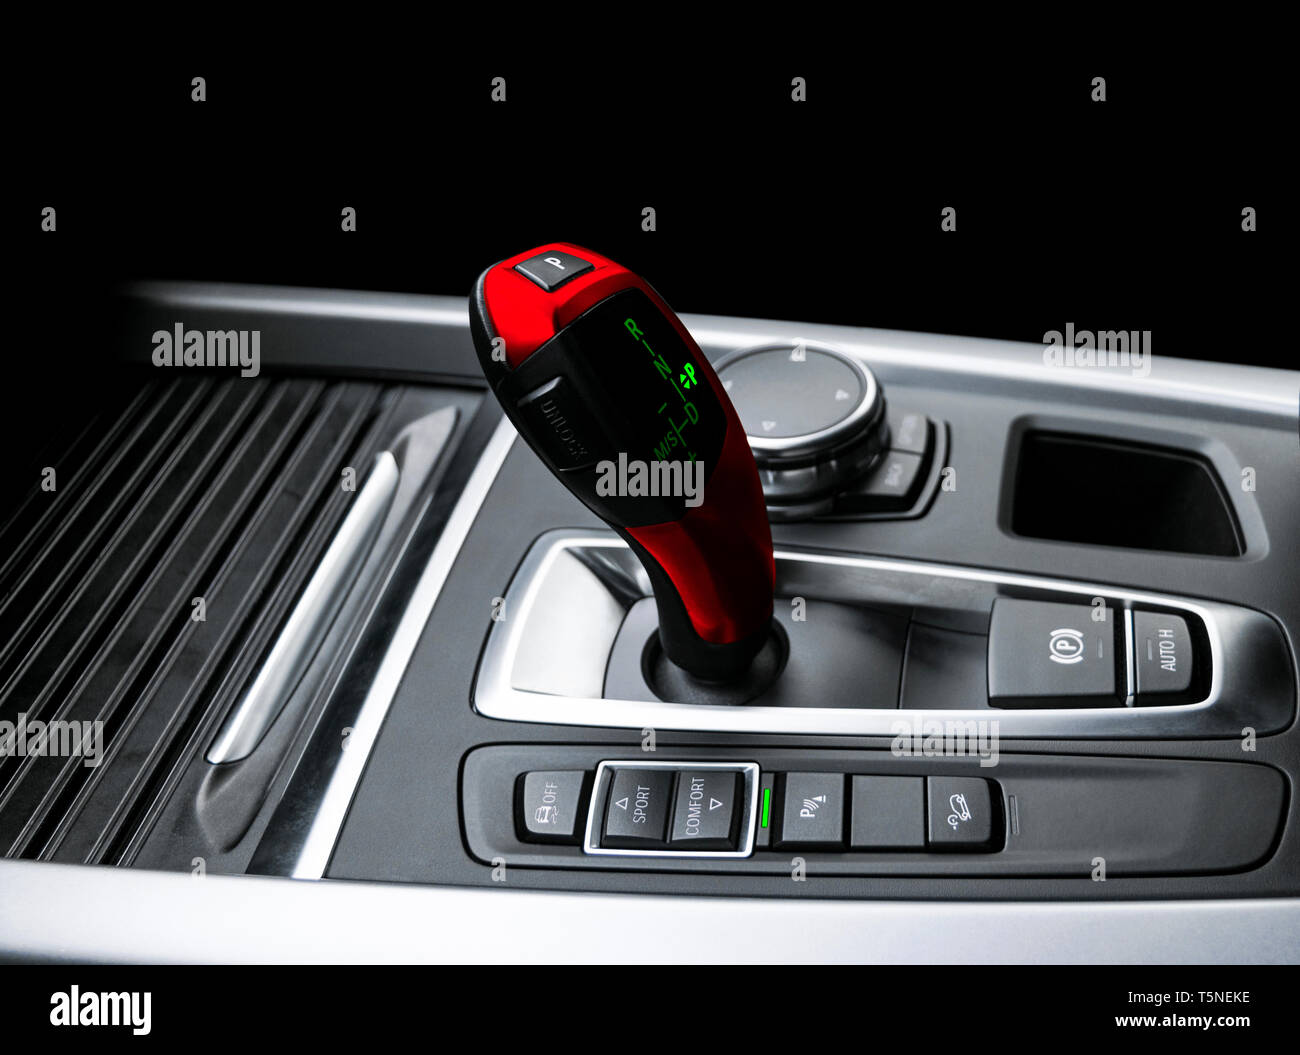 Red Automatic Gear Stick Of A Modern Car Maodern Car Interior Details Close Up View Car Detailing Automatic Transmission Lever Shift Isolated On B Stock Photo Alamy